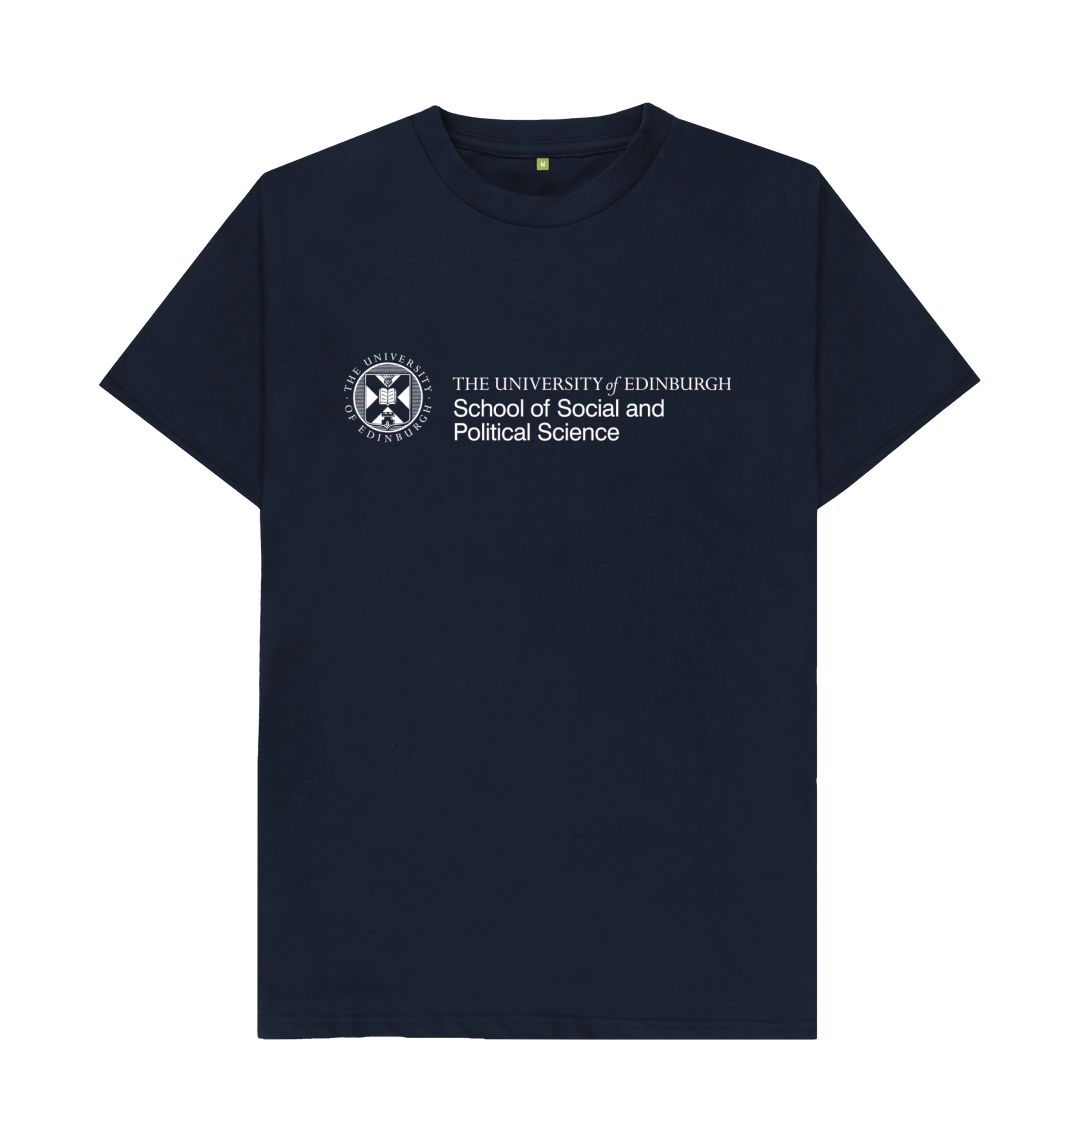 Navy T Shirt  with white University crest and text that reads ' University of Edinburgh School of Social and Political Science